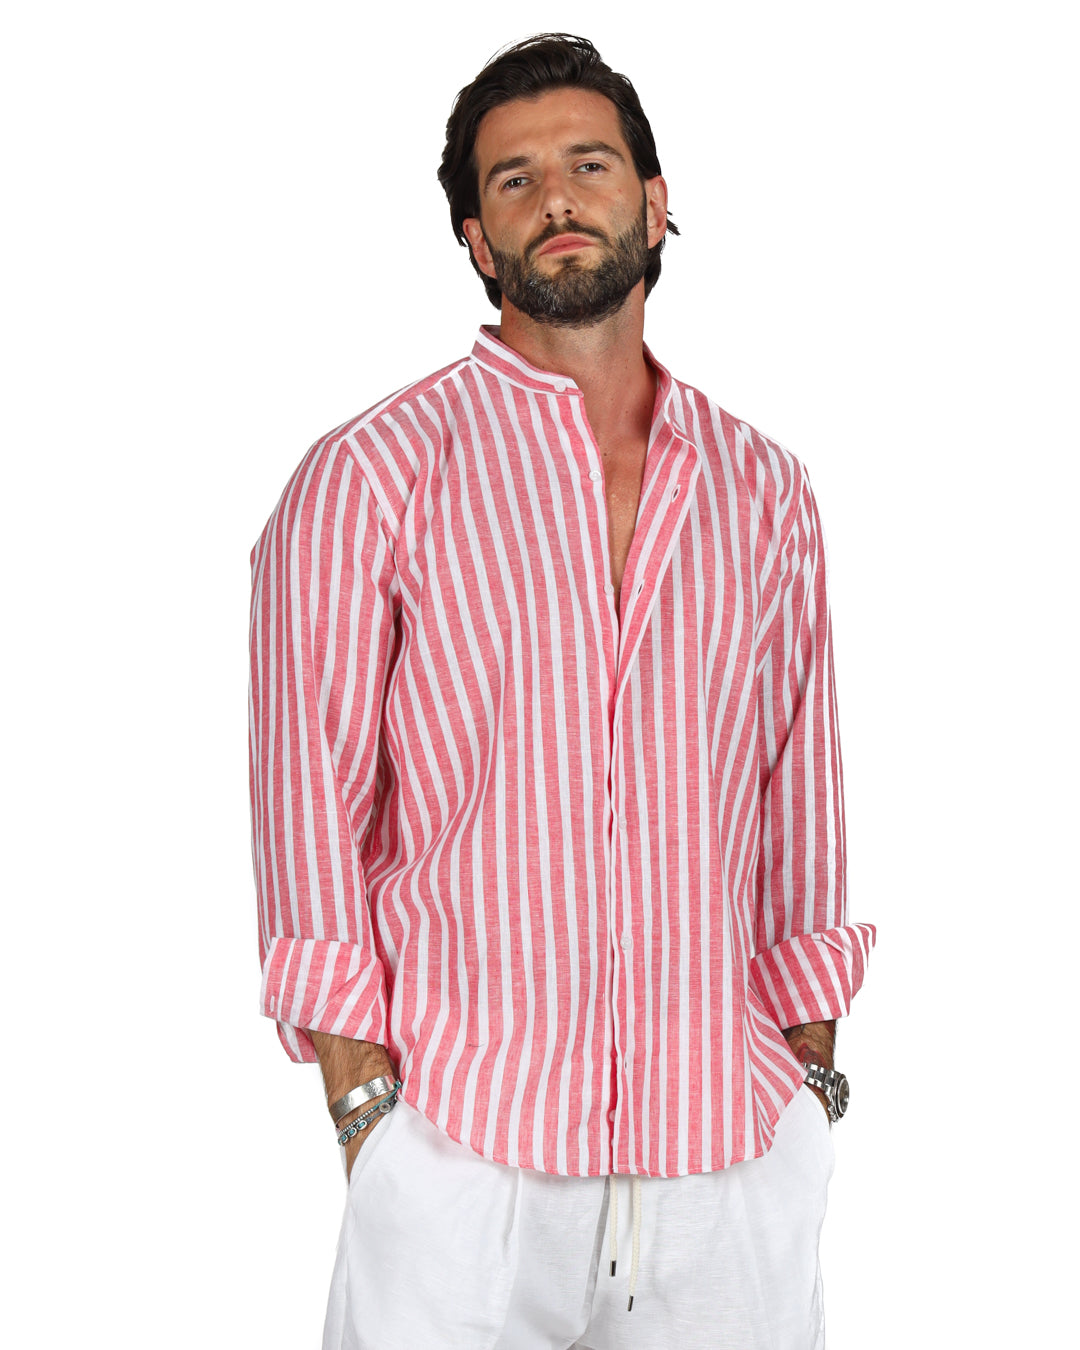 Procida - Korean linen shirt with wide red stripes